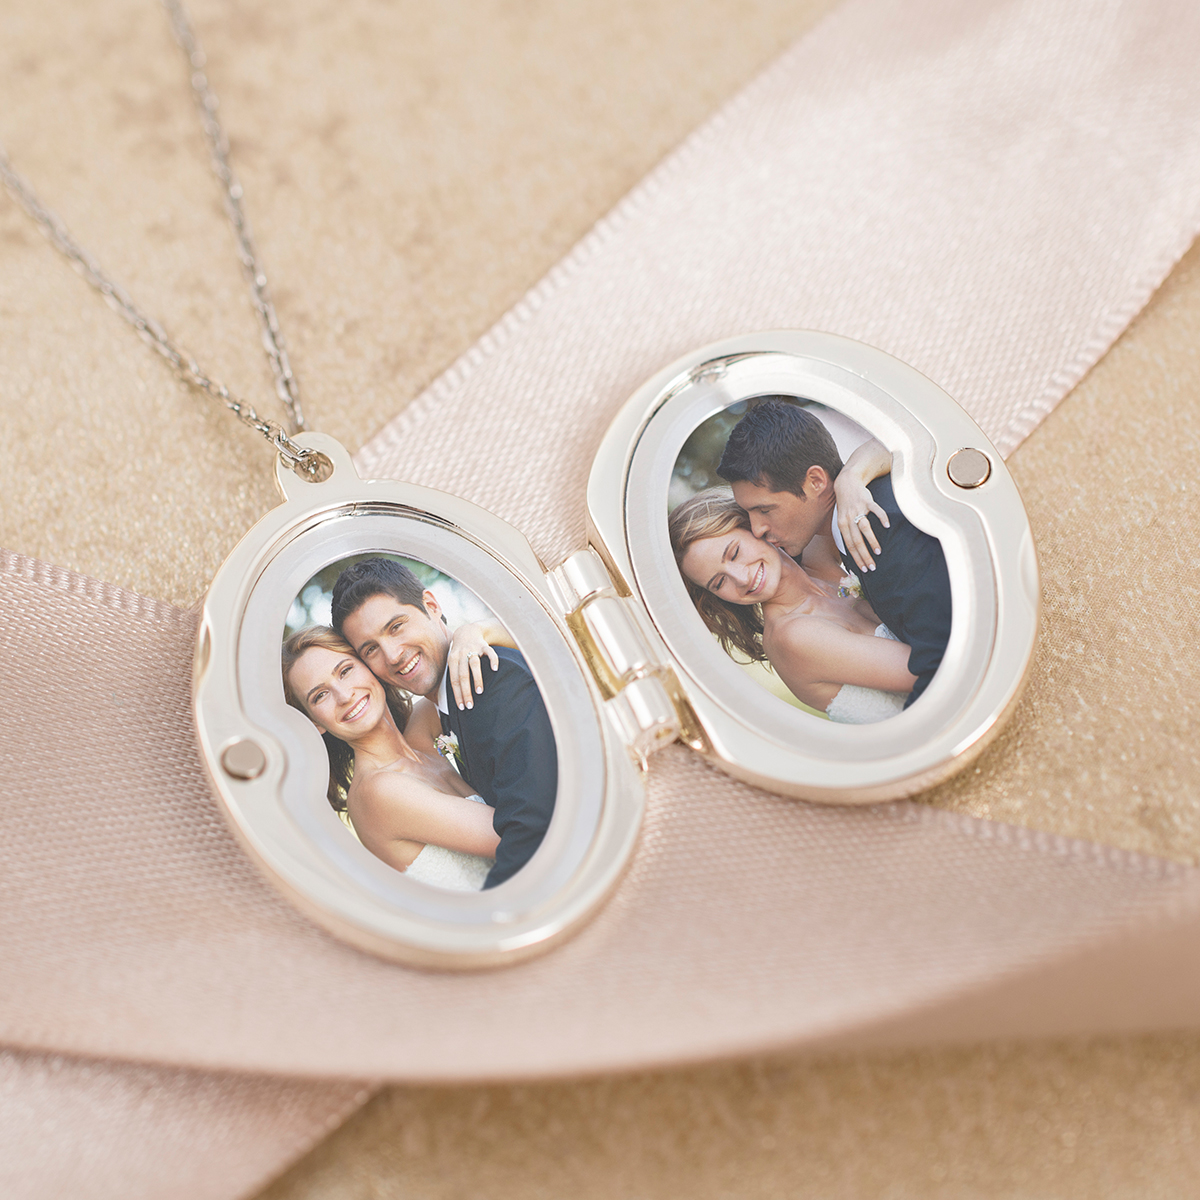 Personalised Engraved Oval Shaped Locket Necklace